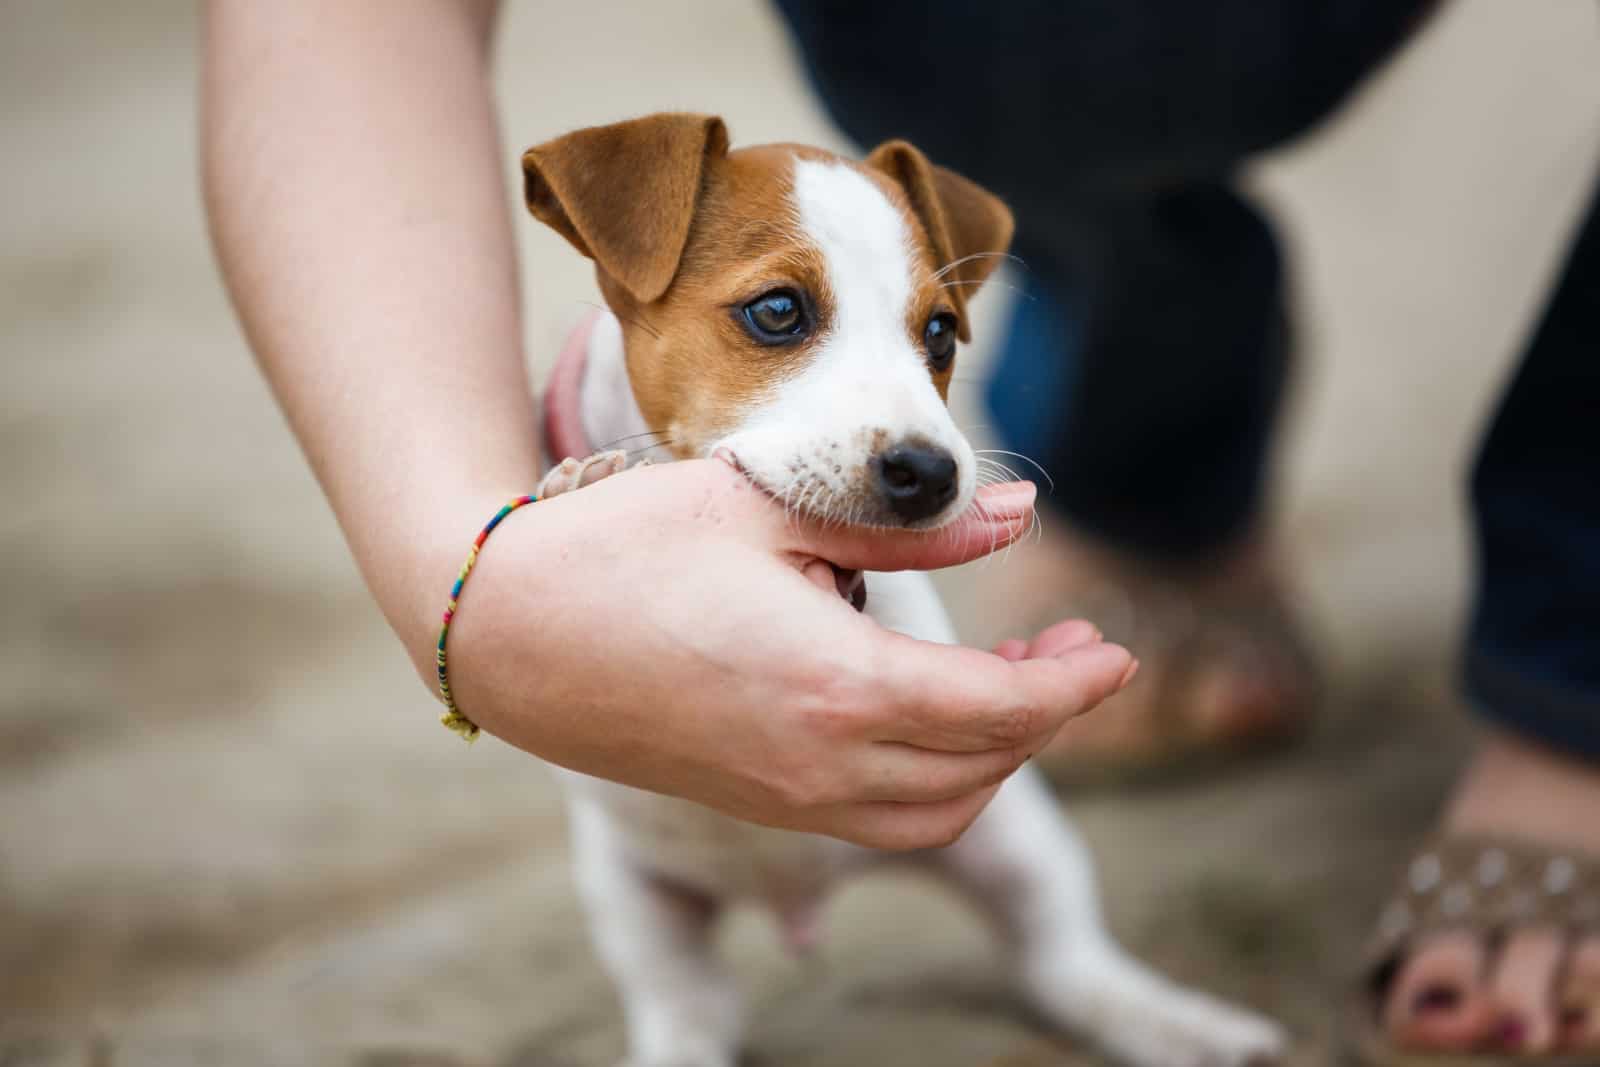 Cheerful puppy Jack Russell terrier playfully biting the fingers of its owner